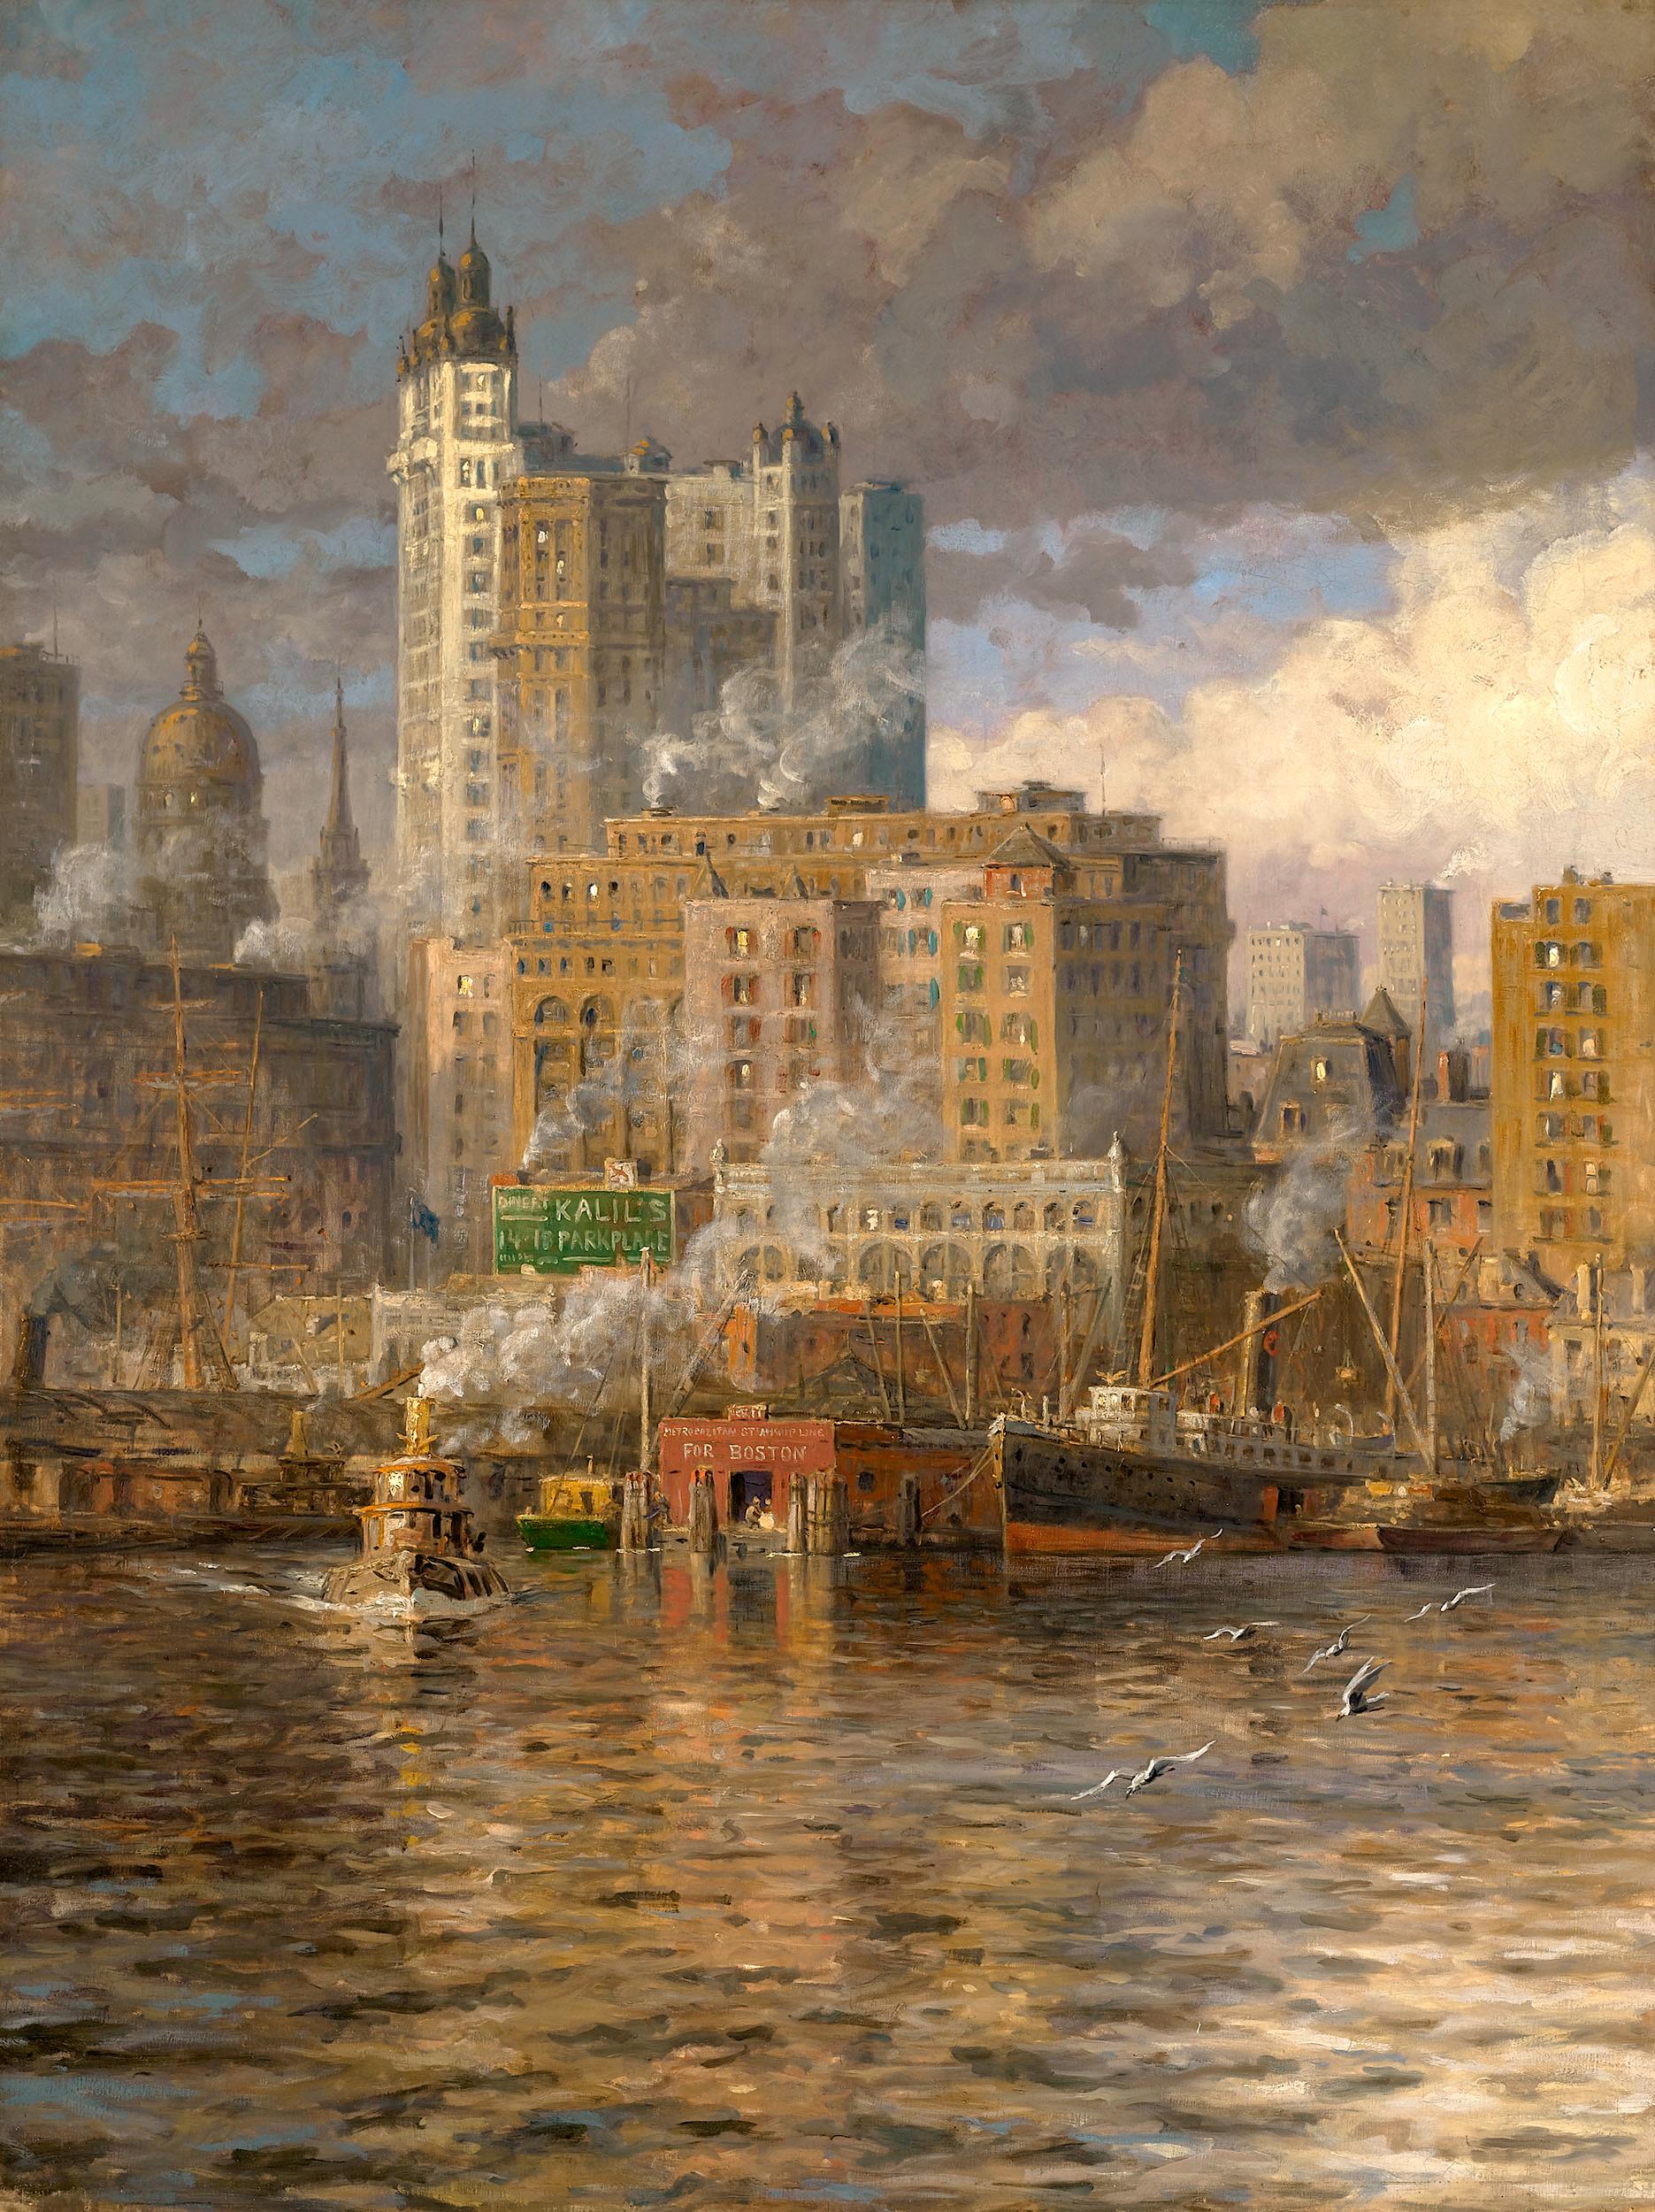 Louis Aston Knight  1873-1948  American 

The Giant Cities–New York

Signed "Aston Knight" (lower right)
Oil on canvas

This monumental landscape painting of New York’s North River was created by Parisian-born American artist, Louis Aston Knight.